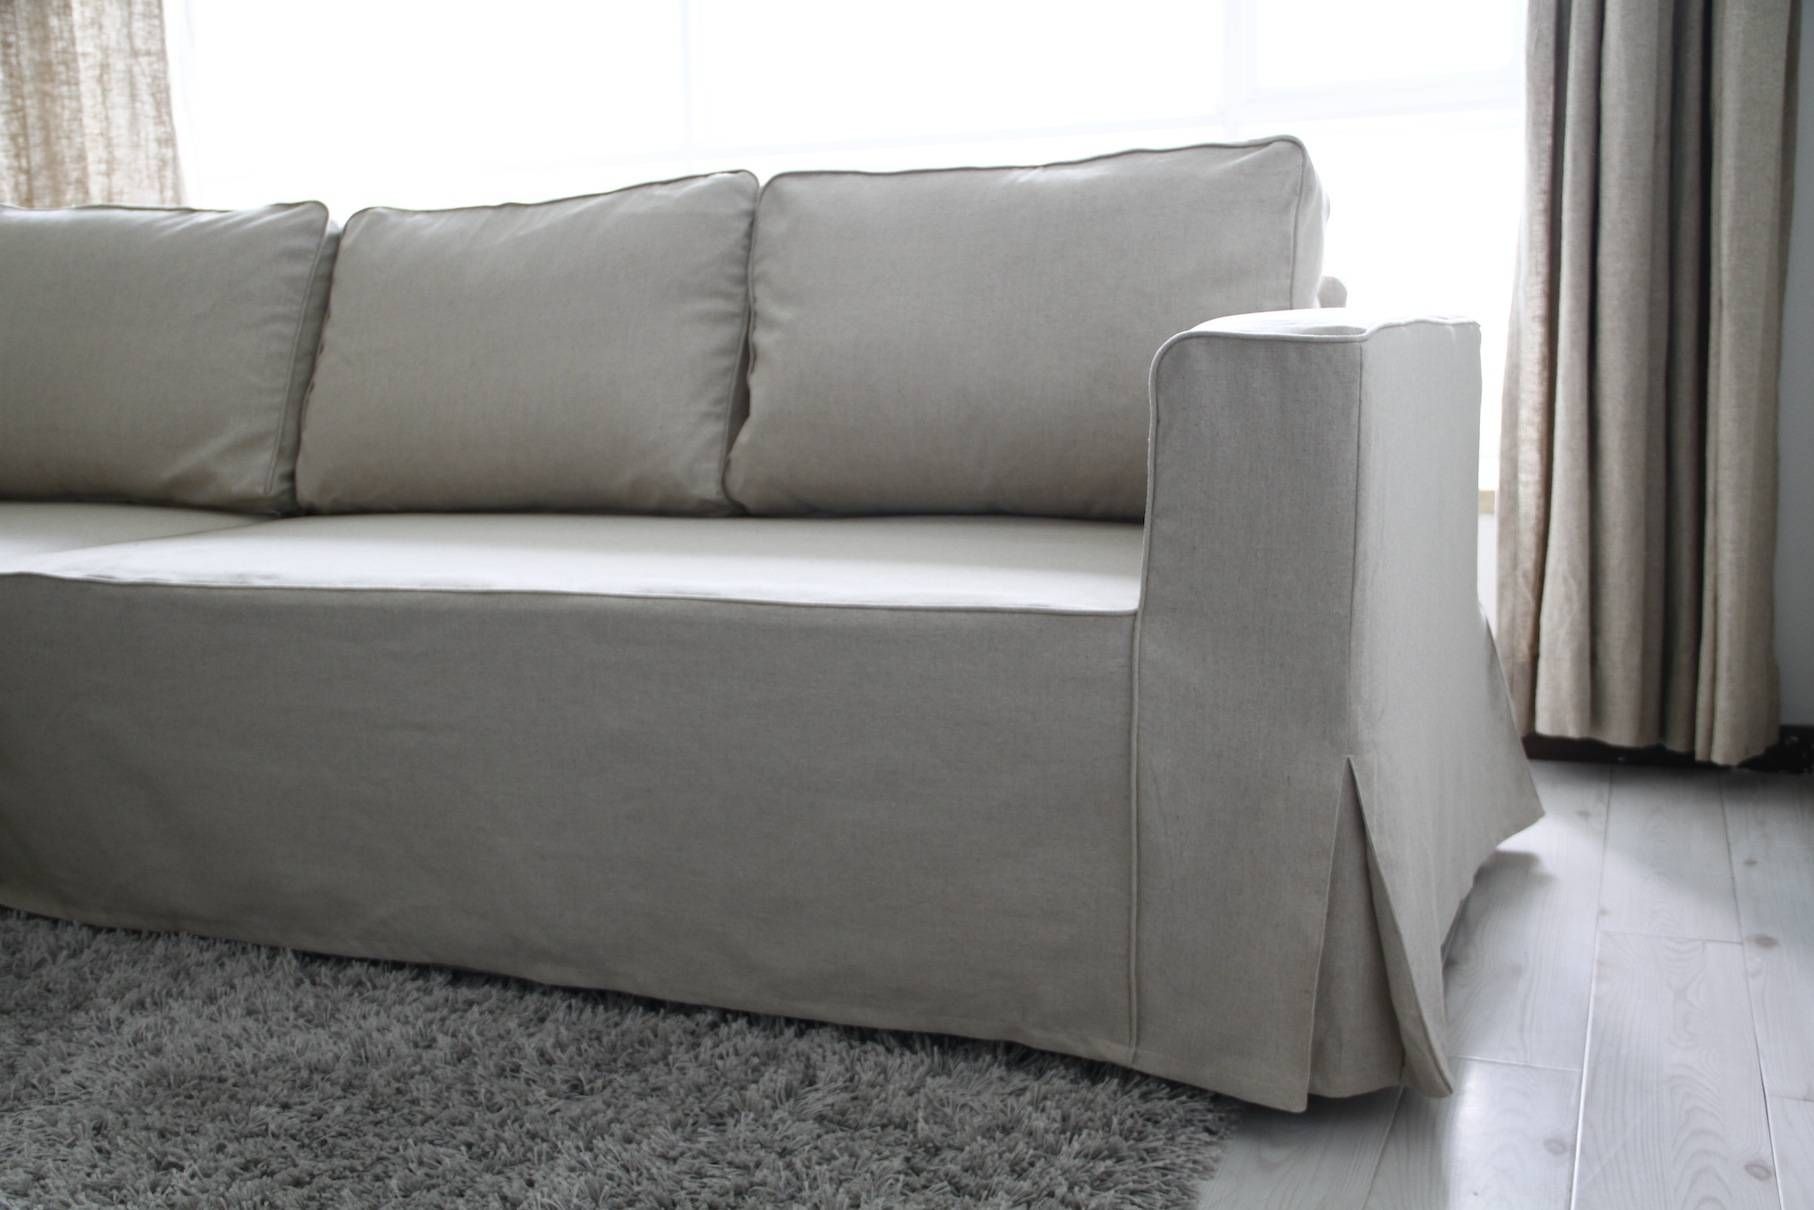 Loose Fit Linen Manstad Sofa Slipcovers Now Available Pertaining To Sofa Armchair Covers (View 17 of 30)